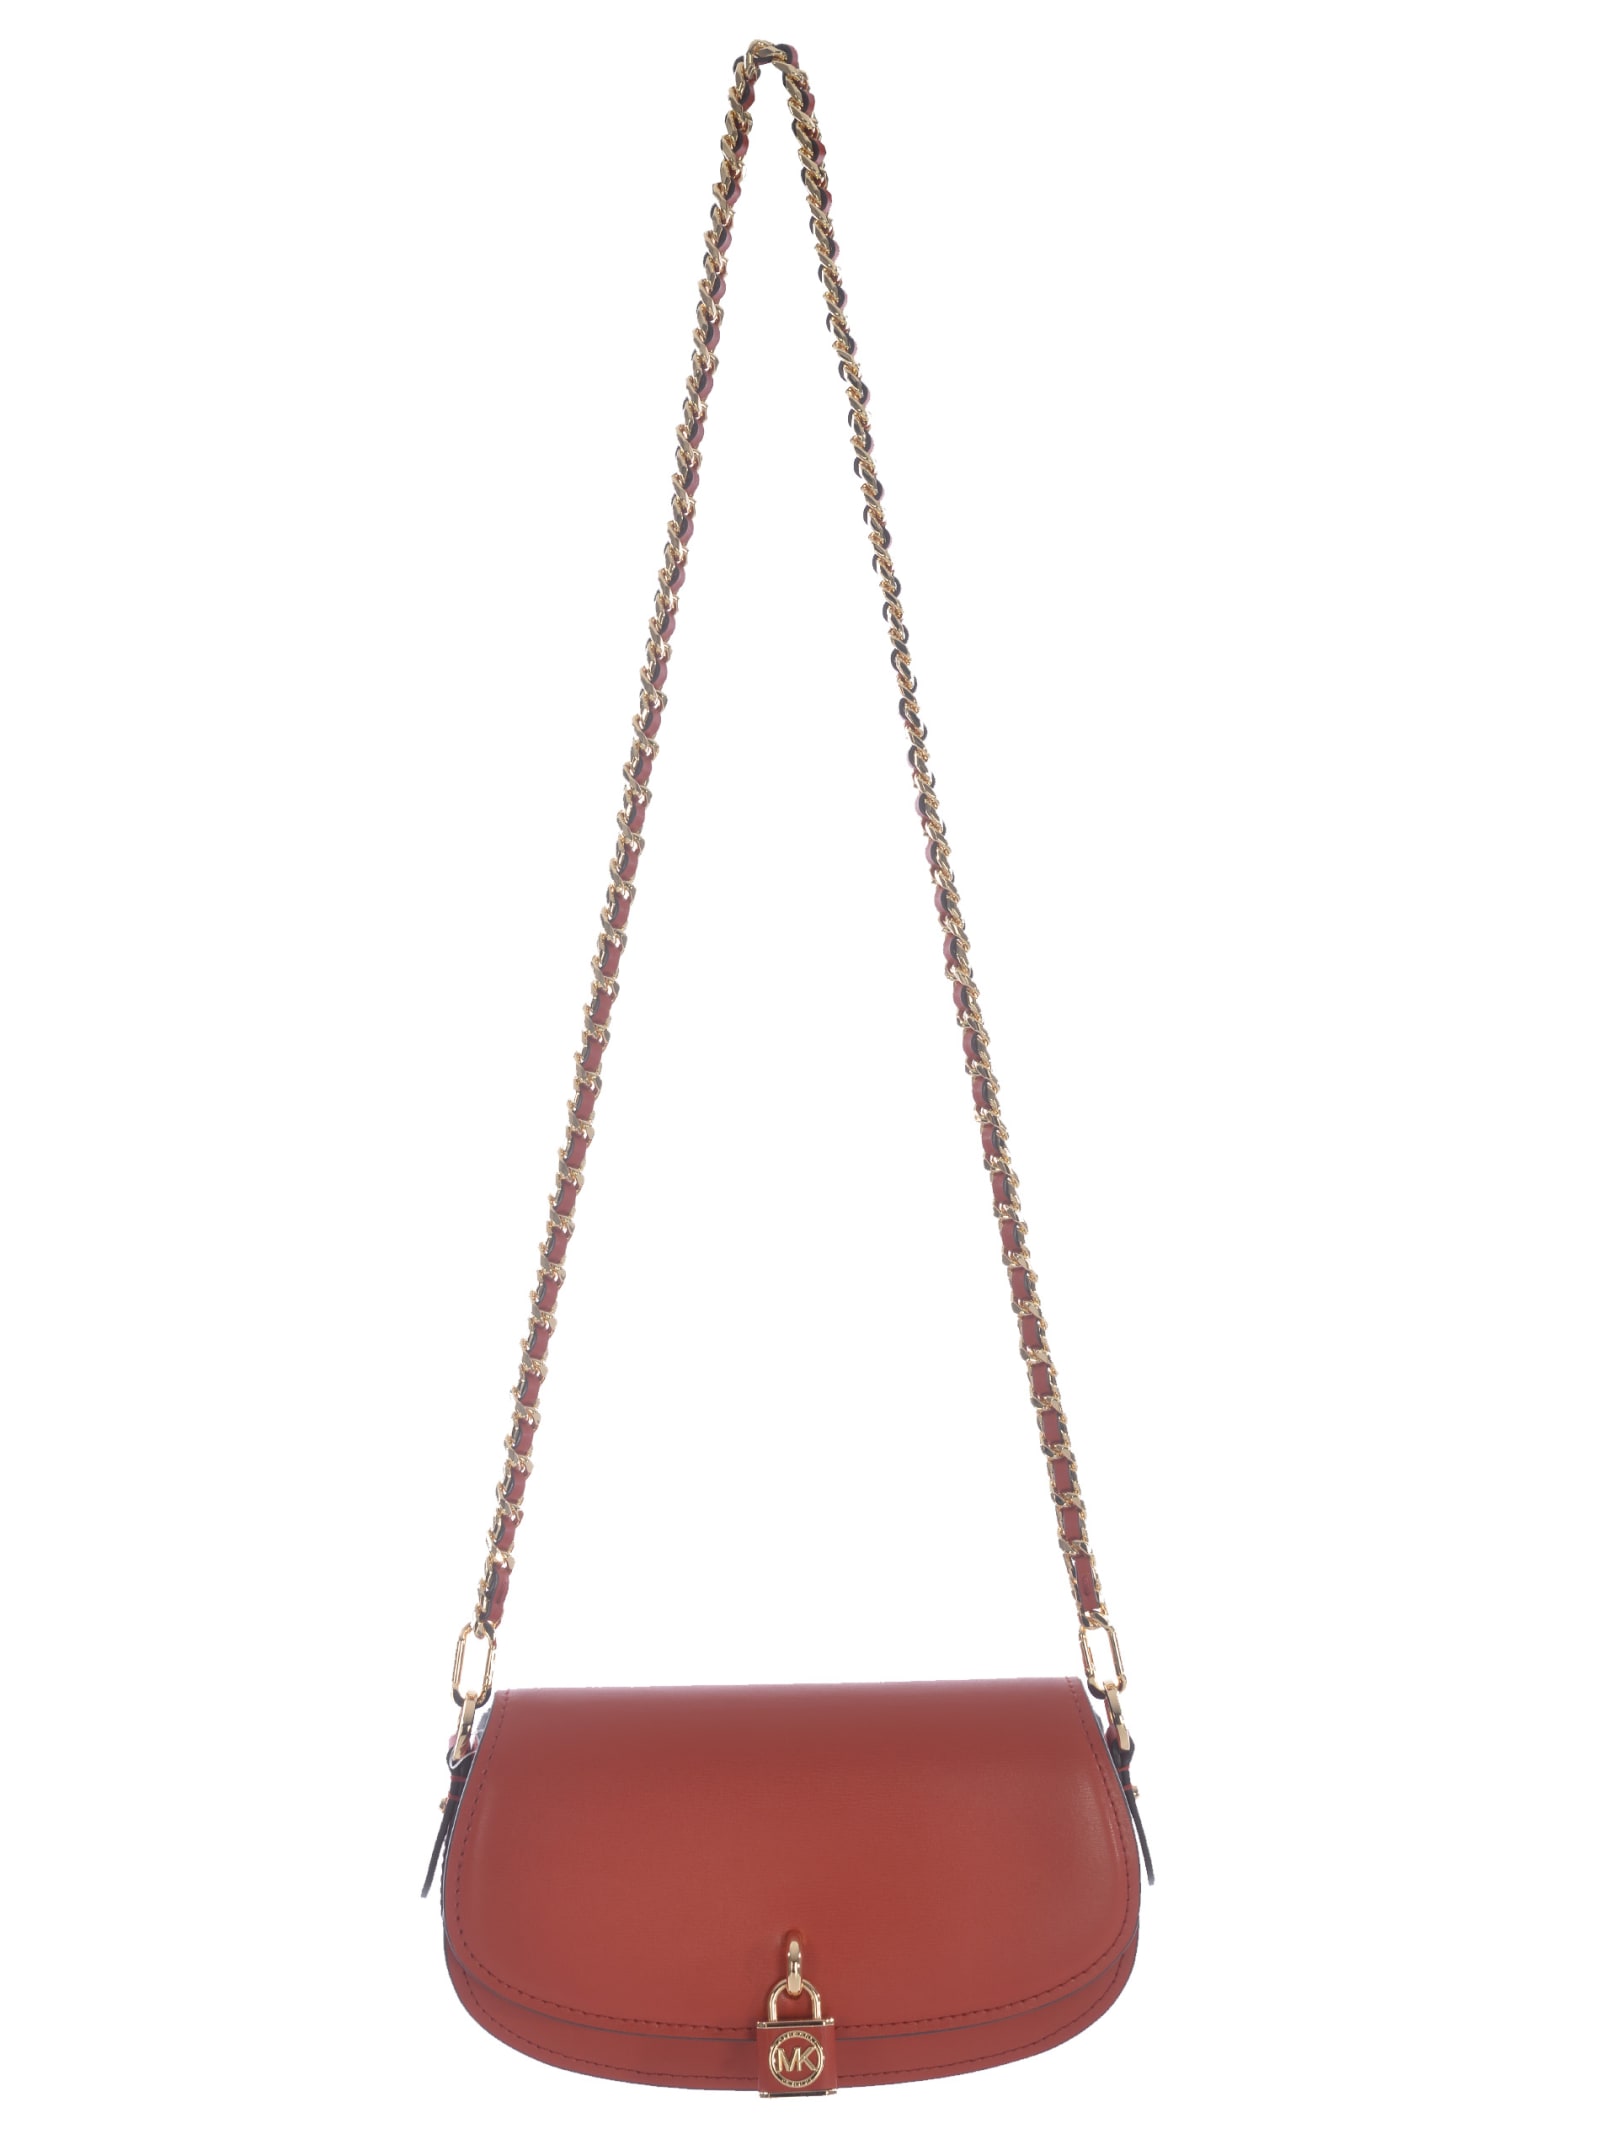 Shop Michael Kors Bag  Mila Made Of Smooth Leather In Terracotta